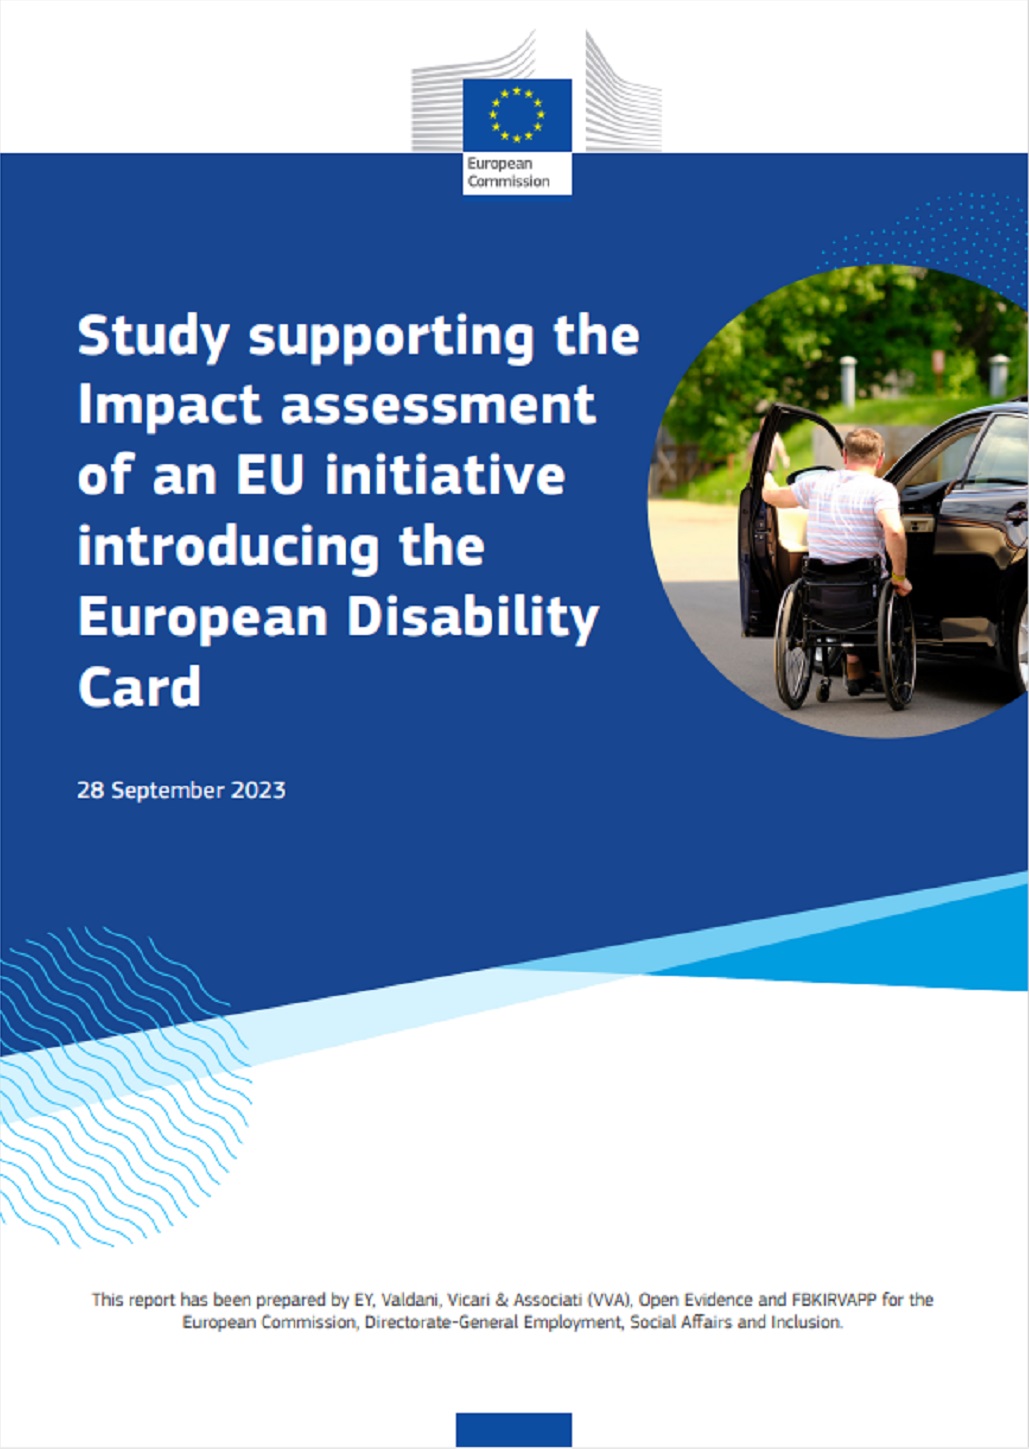 Study supporting the impact assessment of an EU initiative introducing the European Disability Card